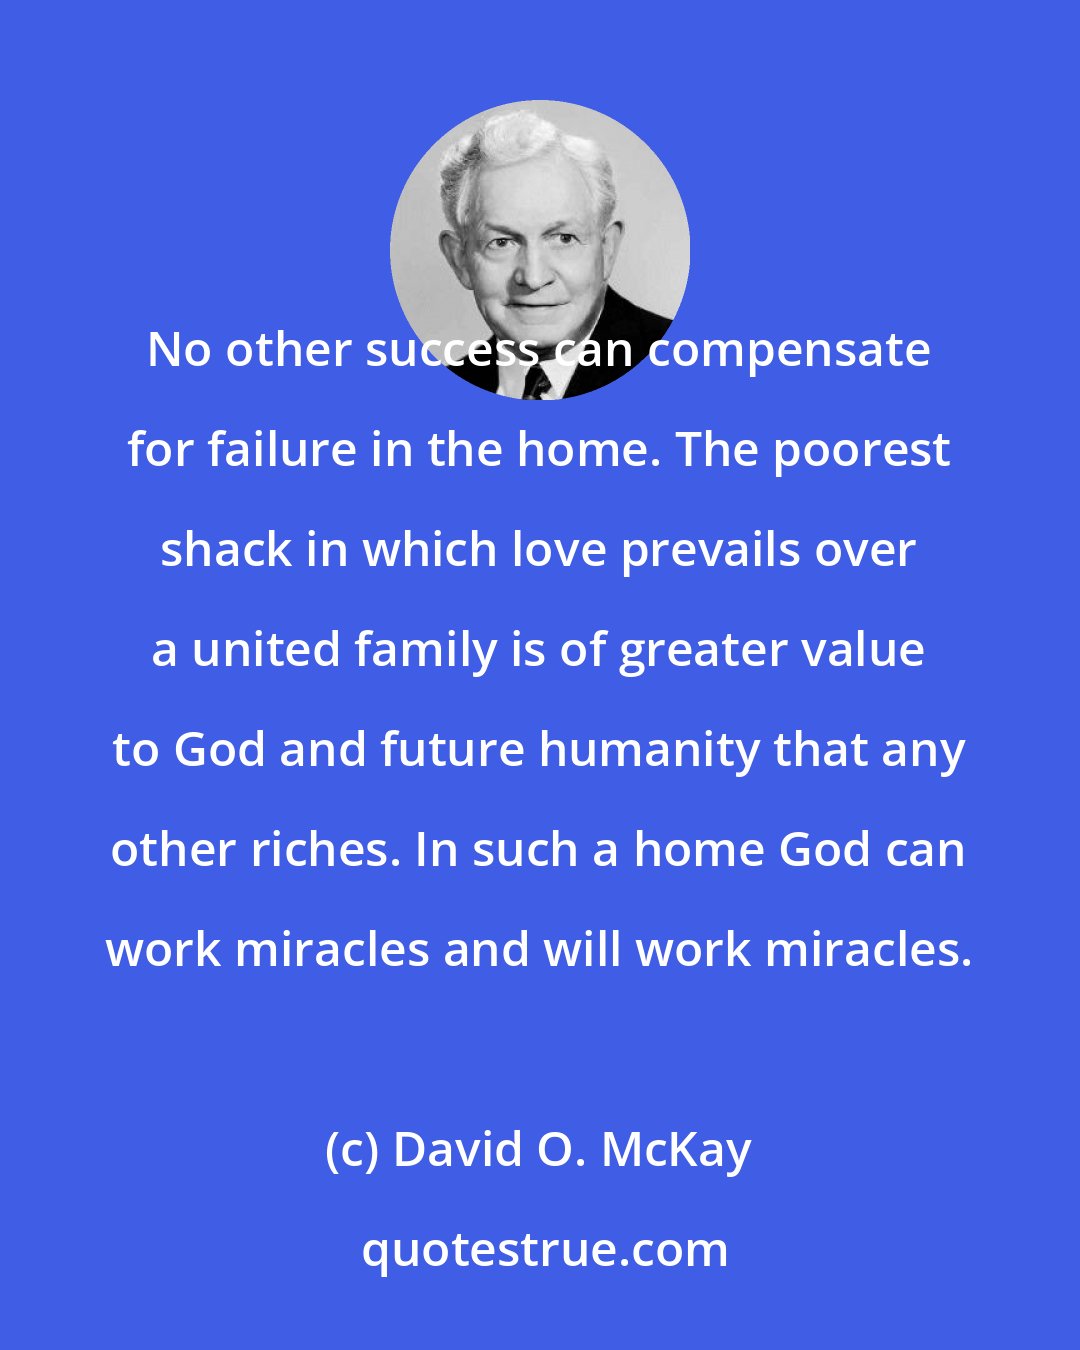 David O. McKay: No other success can compensate for failure in the home. The poorest shack in which love prevails over a united family is of greater value to God and future humanity that any other riches. In such a home God can work miracles and will work miracles.